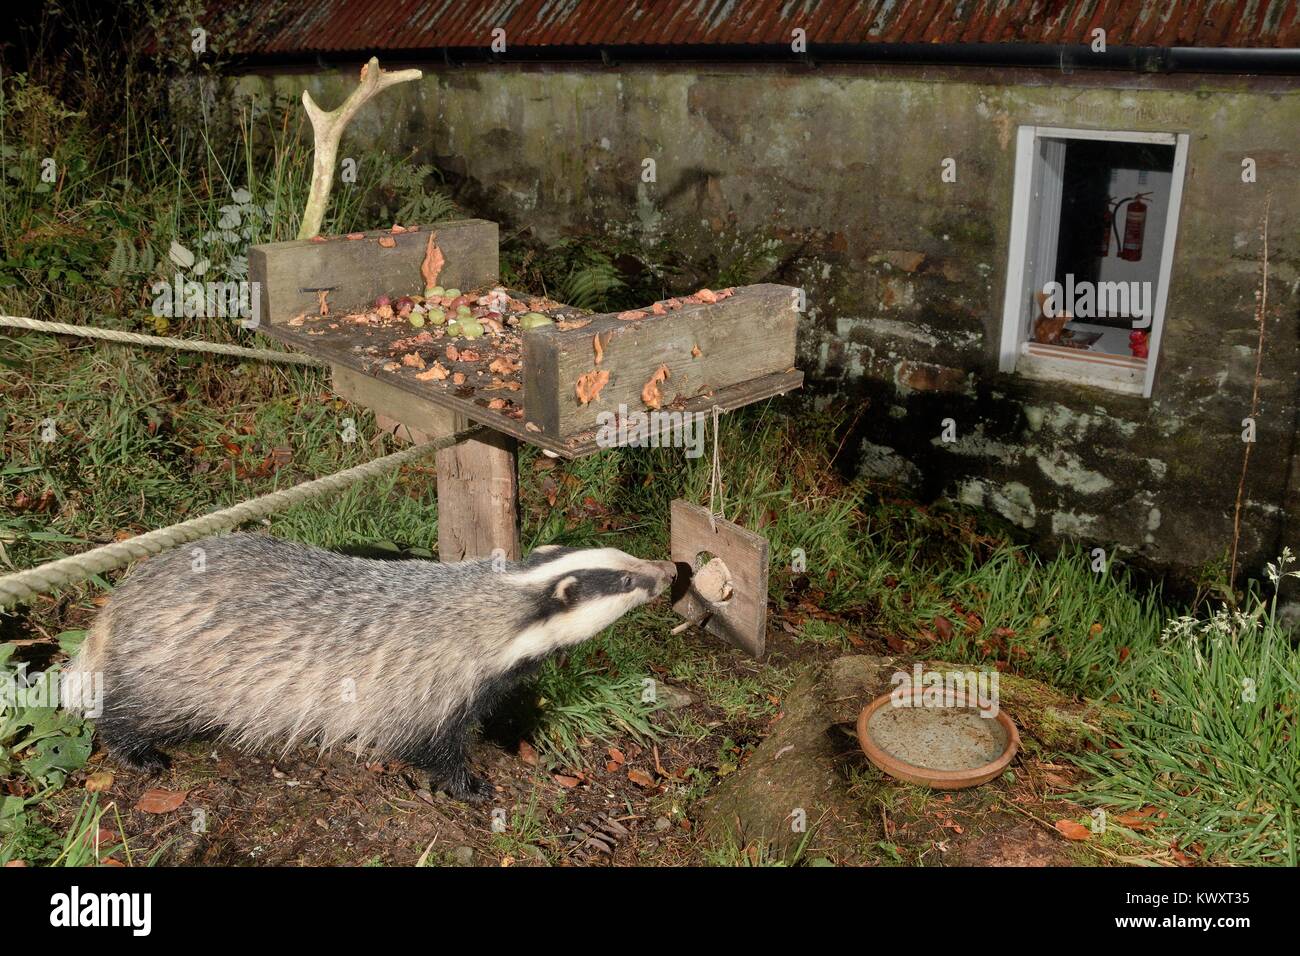 European badger (Meles meles) visiting a bird table at an ecotourism centre at night to feed on fat balls, peanut butter and fruit, Knapdale, Scotland Stock Photo